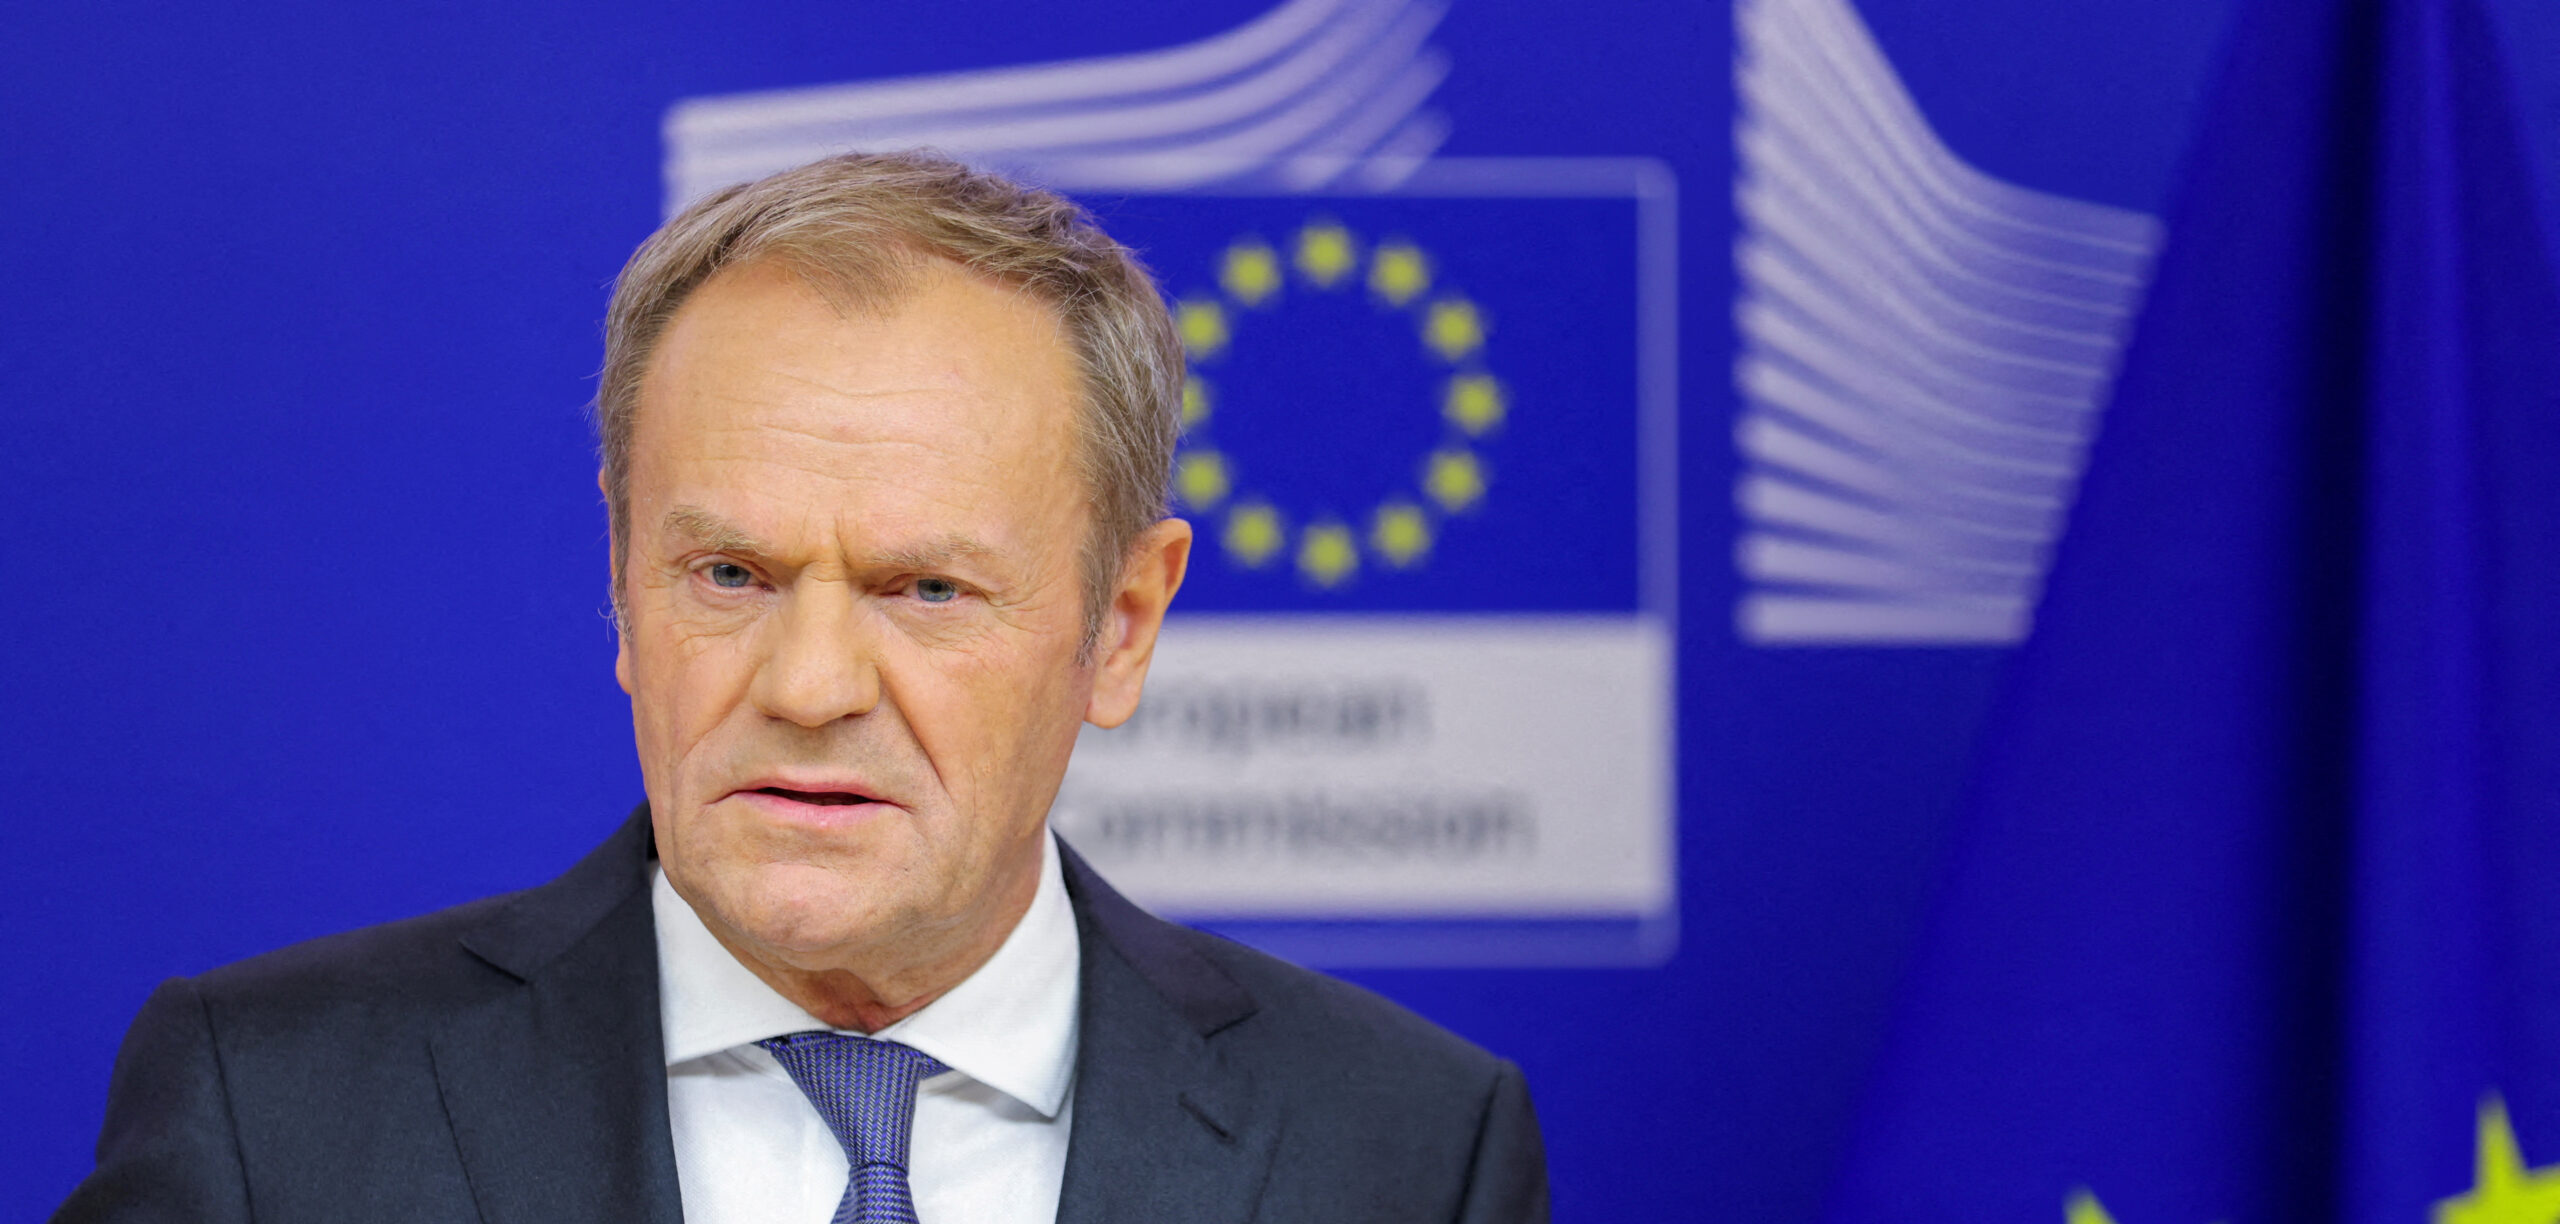 Hungary “switches to Russian positions” – Tusk